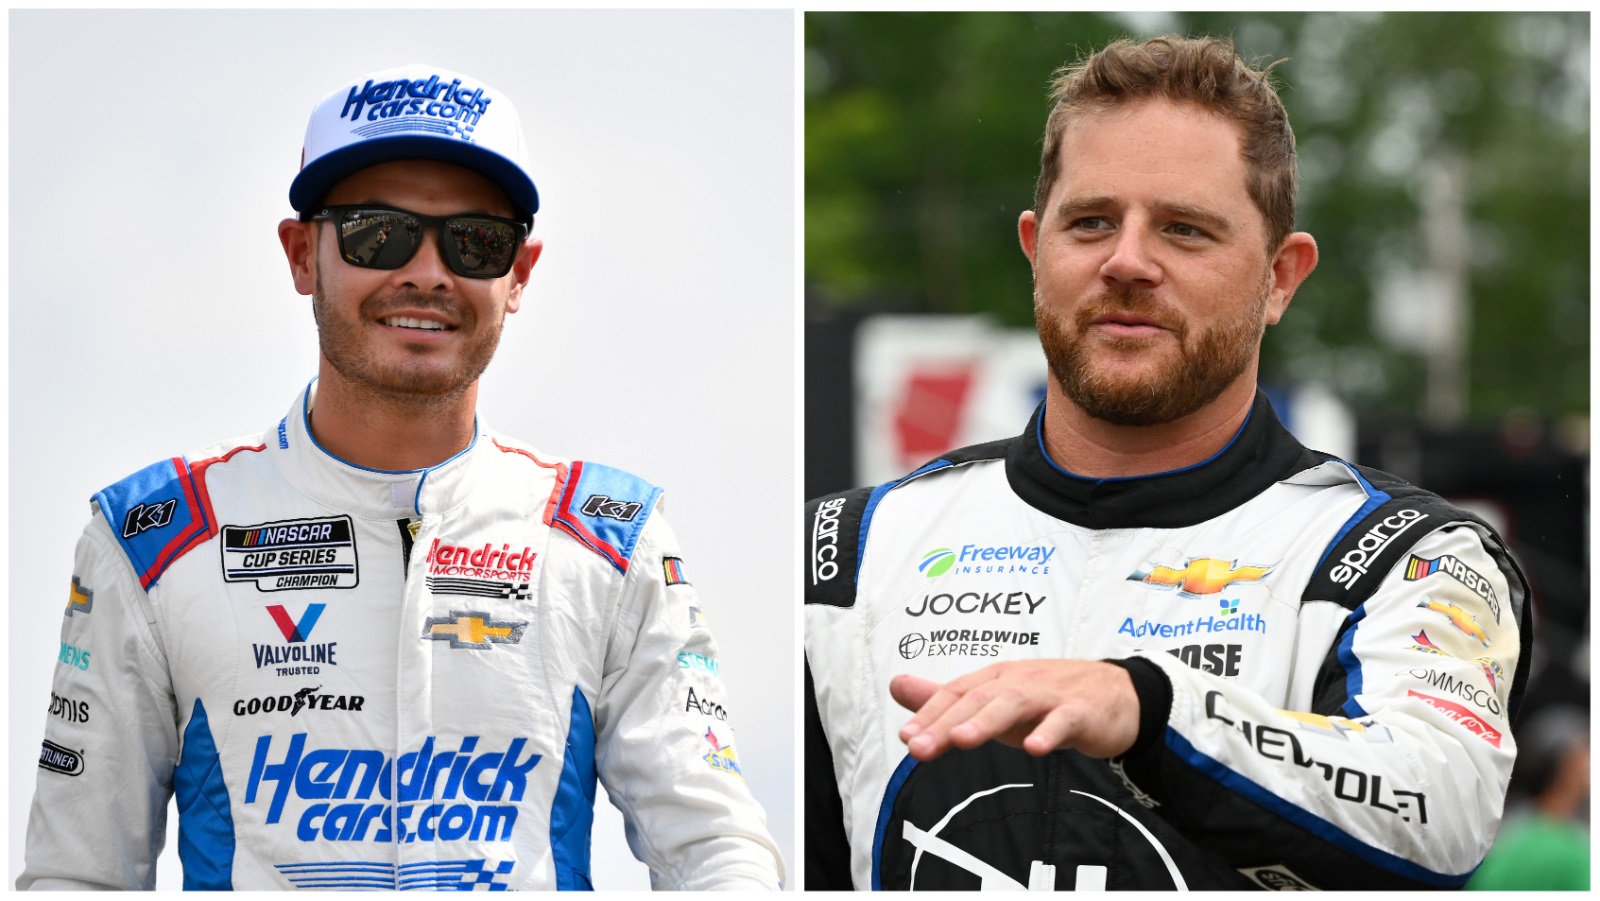 Hendrick Motorsports driver Kyle Larson and  Trackhouse Racing owner Justin Marks. | Getty Images